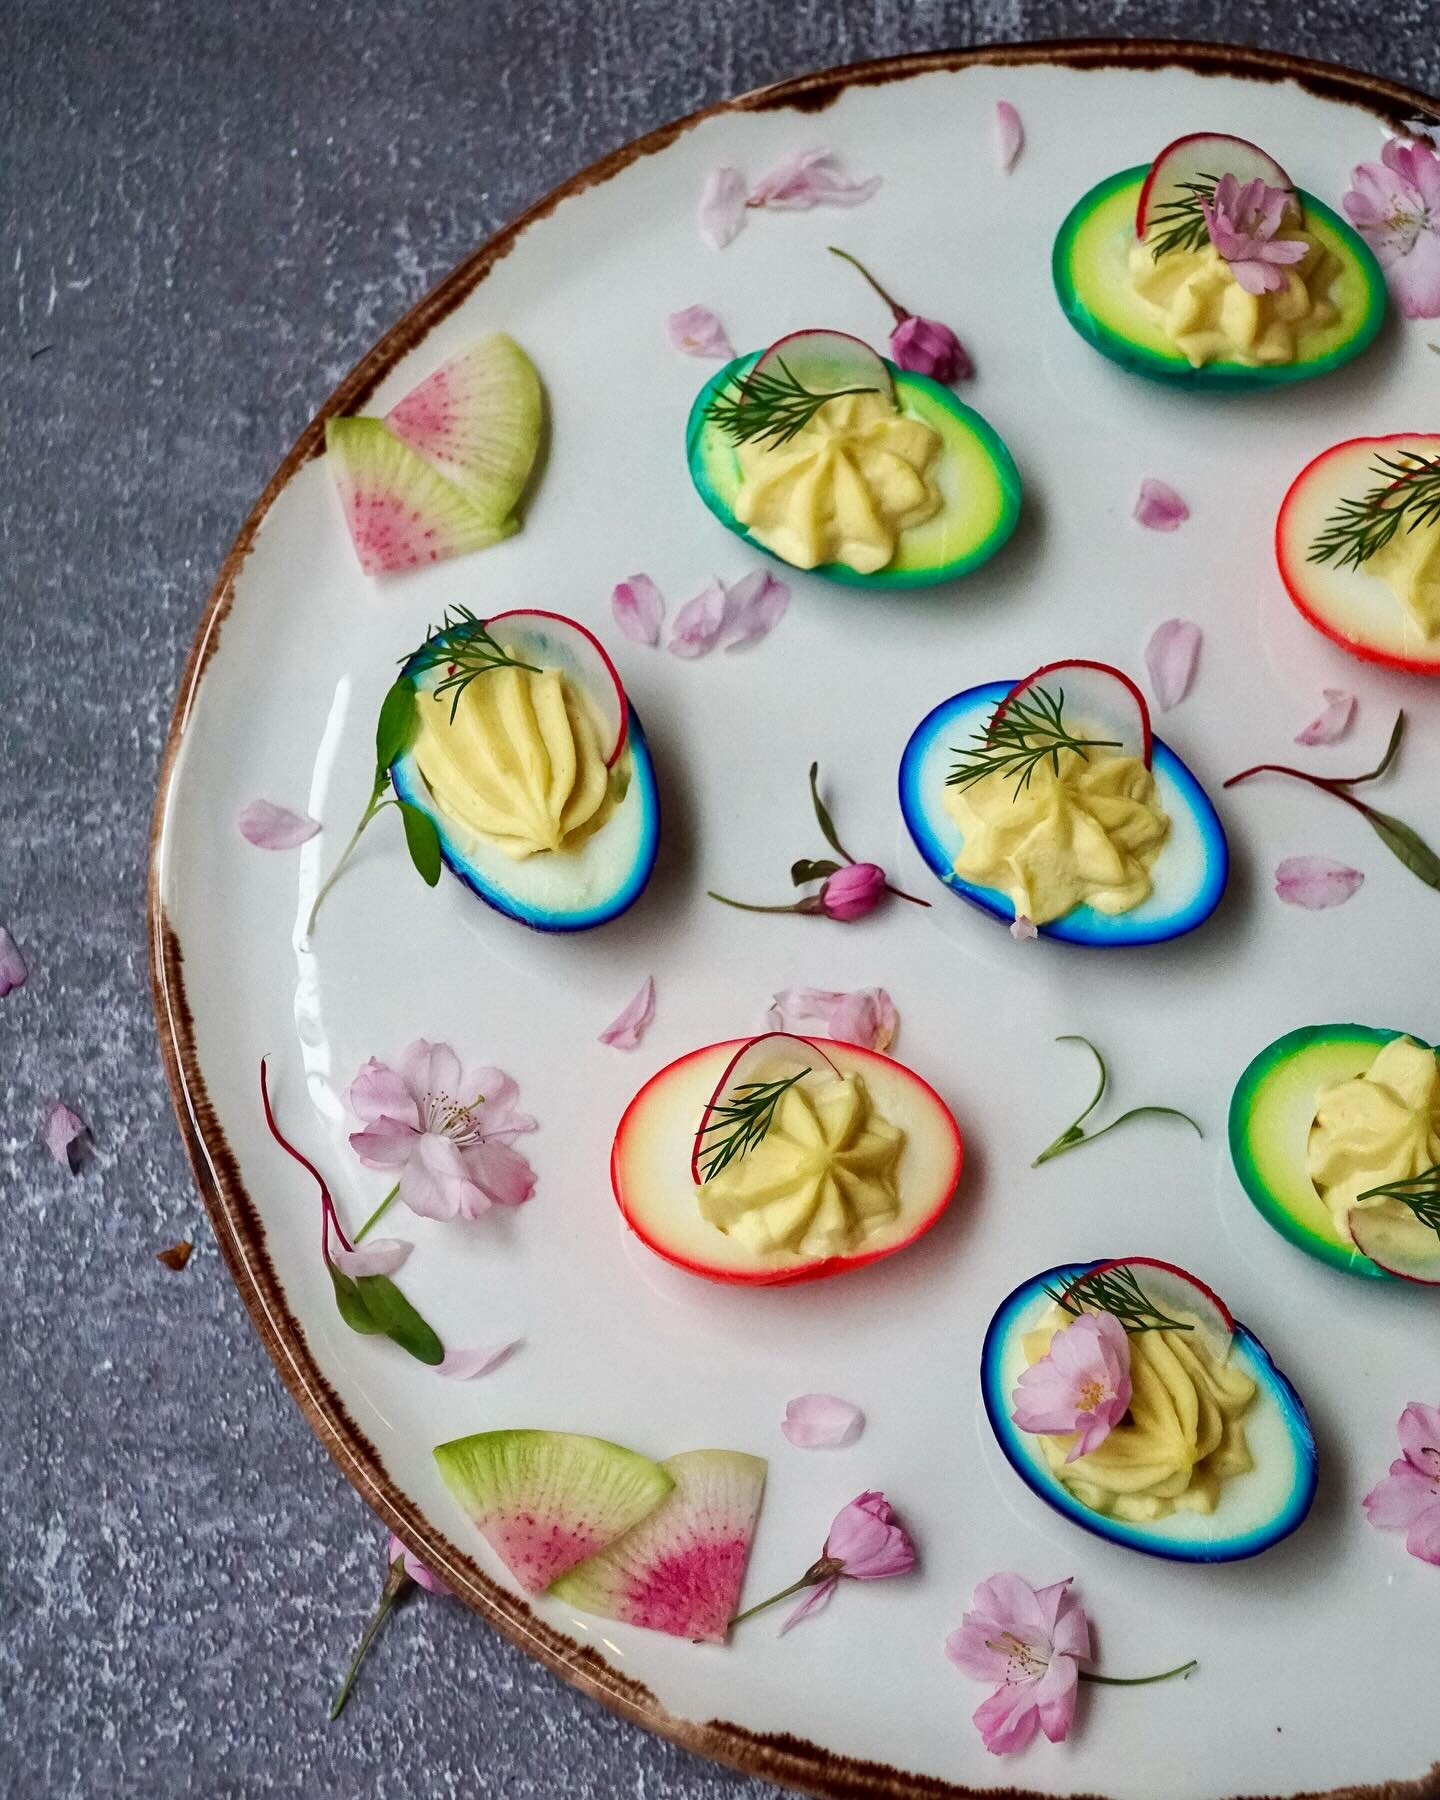 🌷🕊️ Happy Easter and Passover from all of us at Peake!🌷🕊️

As we celebrate this season of renewal and joy, may your gatherings be filled with love, laughter, and delicious moments shared around the table. 

#happyeaster #passover #peakecatering #